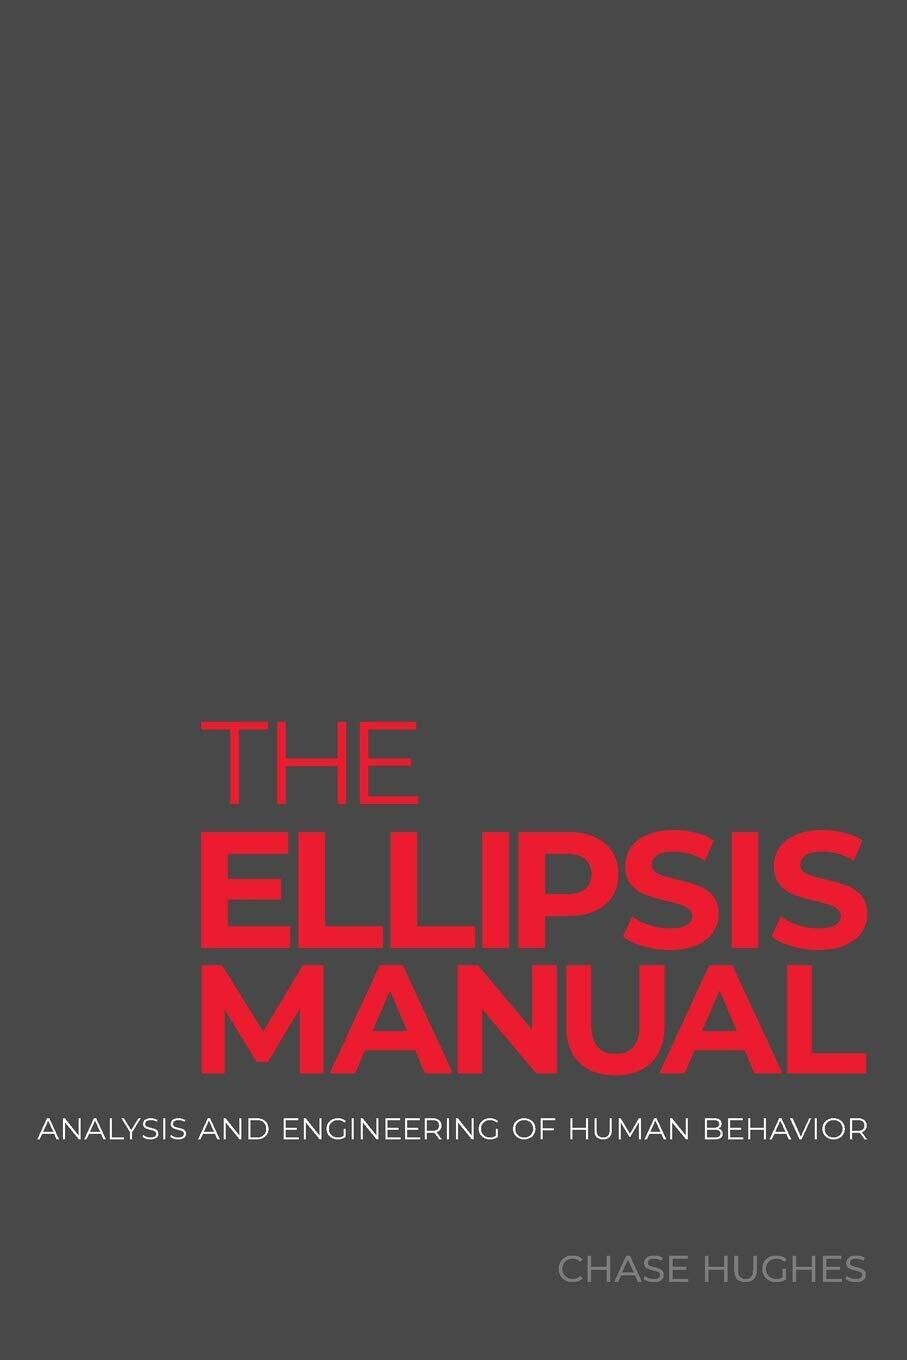 The Ellipsis Manual: Analysis and Engineering of Human Behaviour